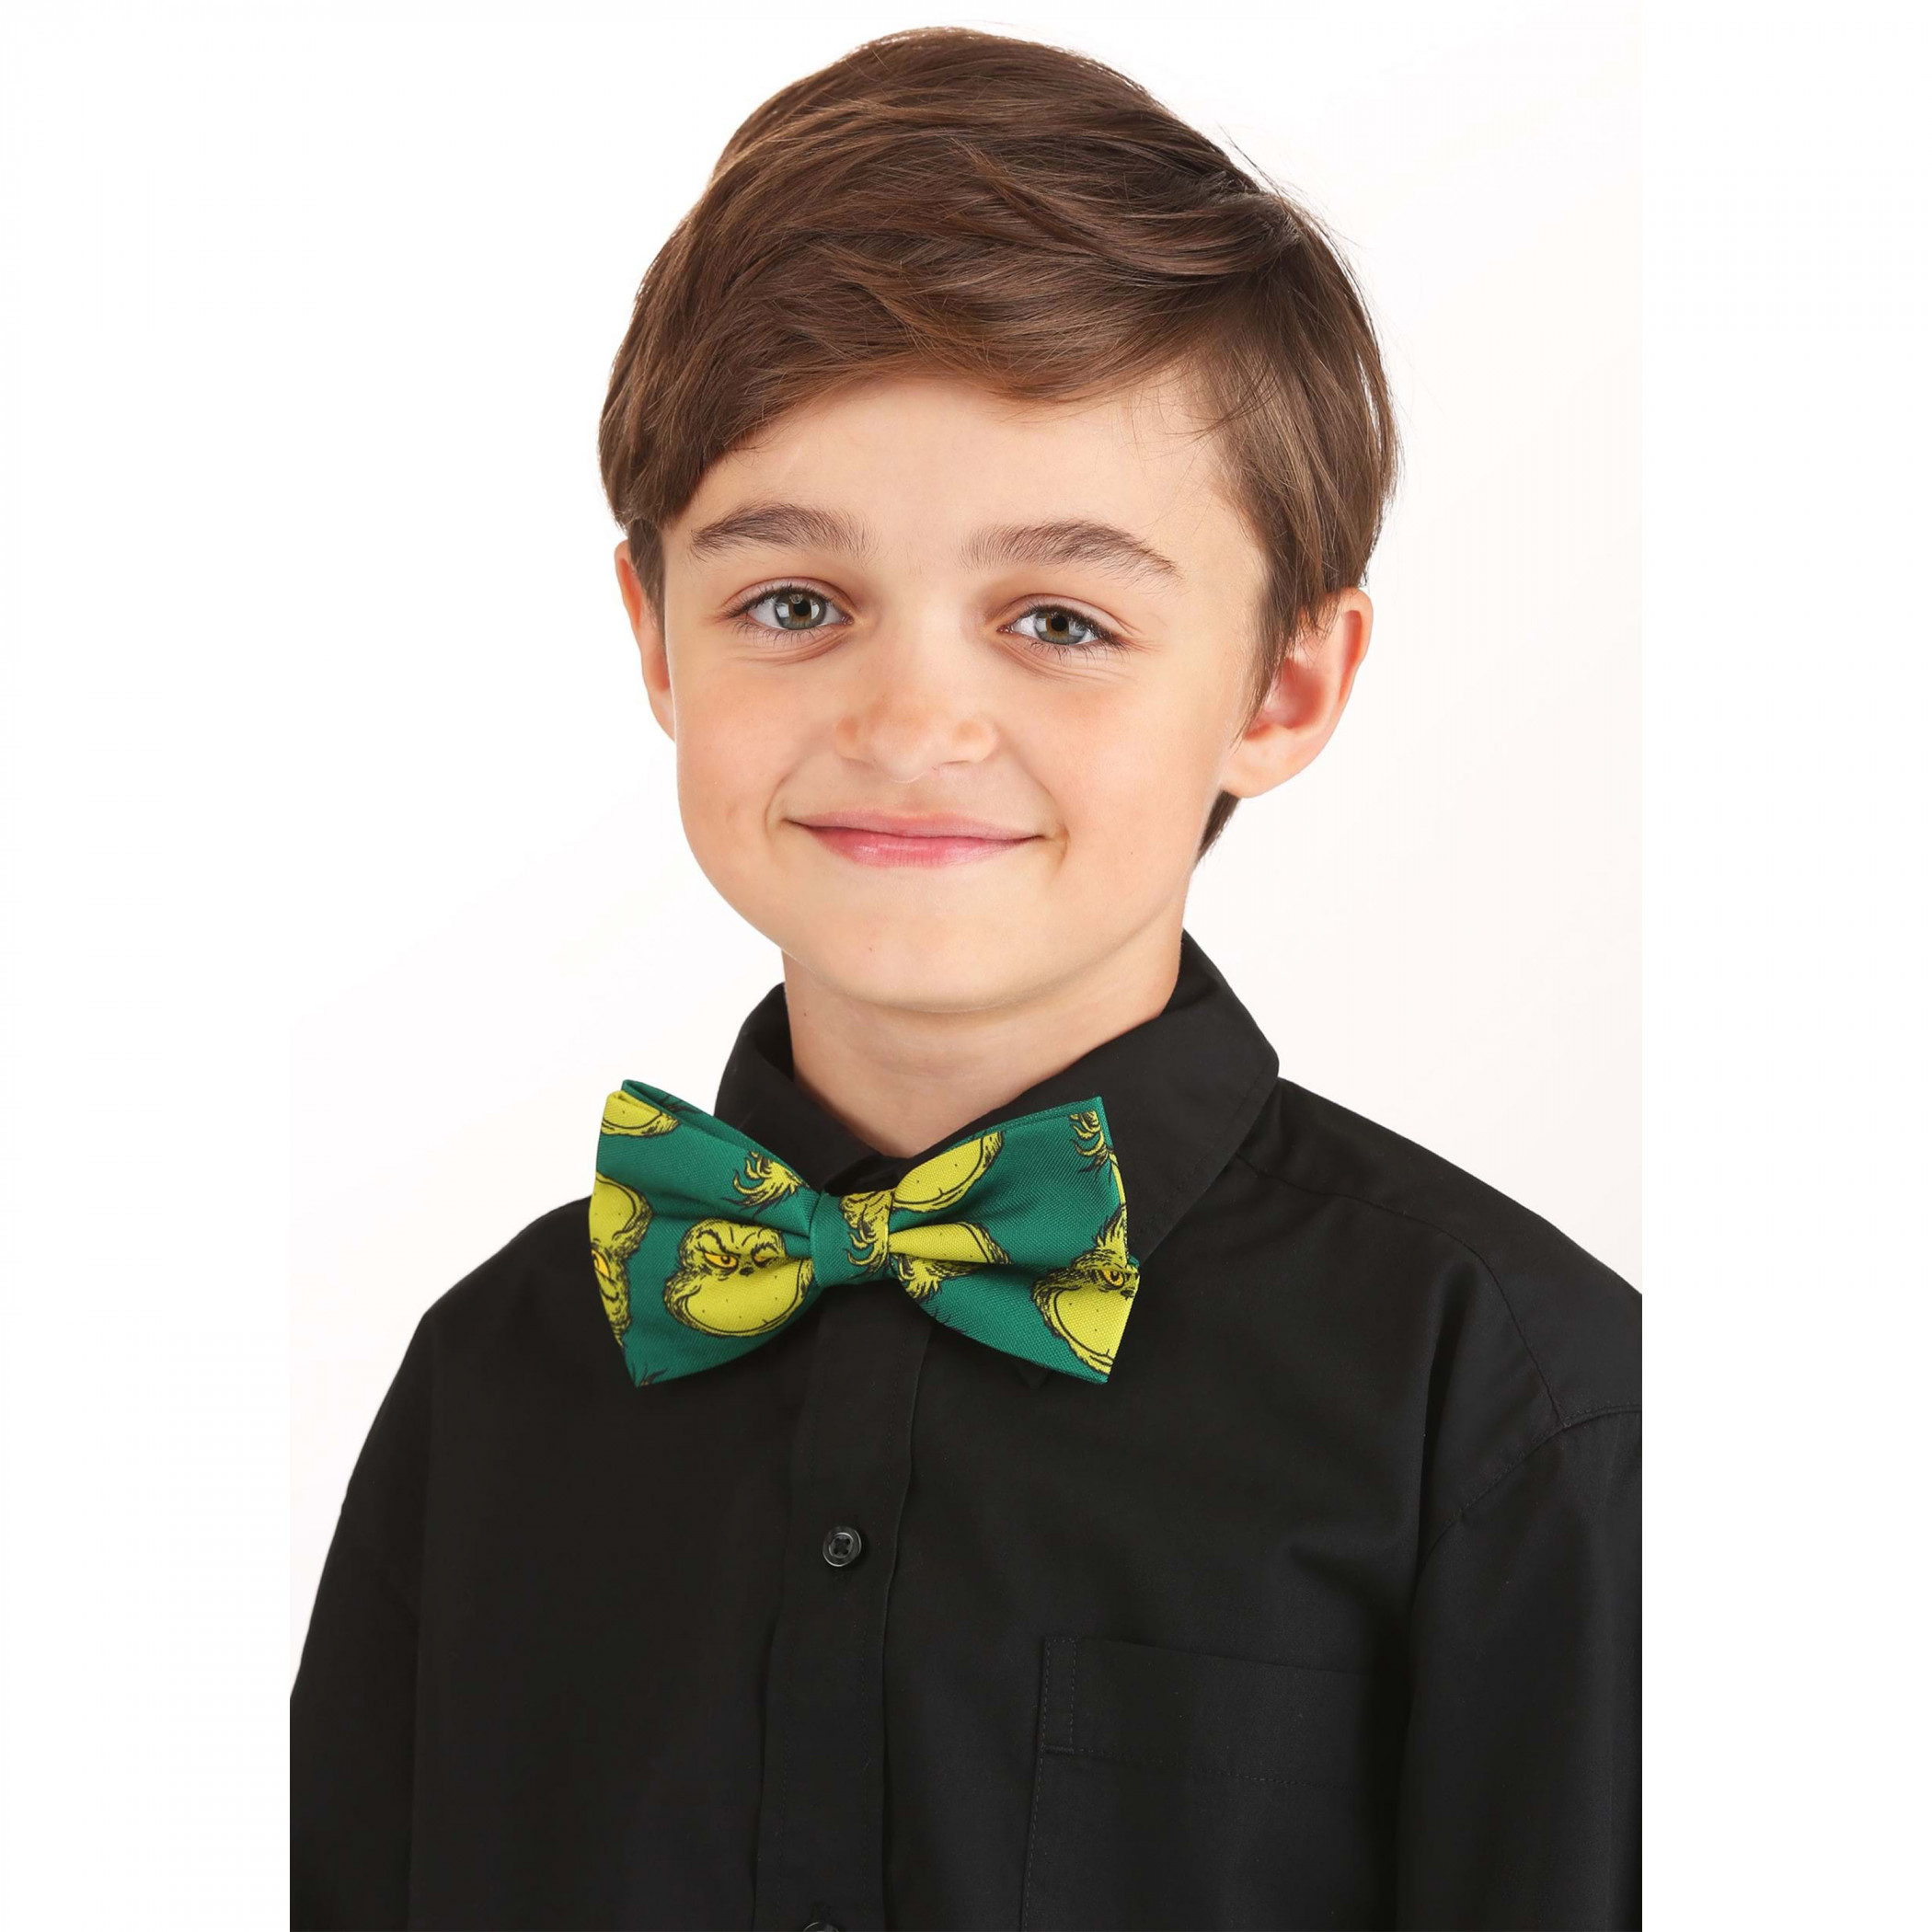 Dr. Seuss Characters Three Piece Bow Tie Set